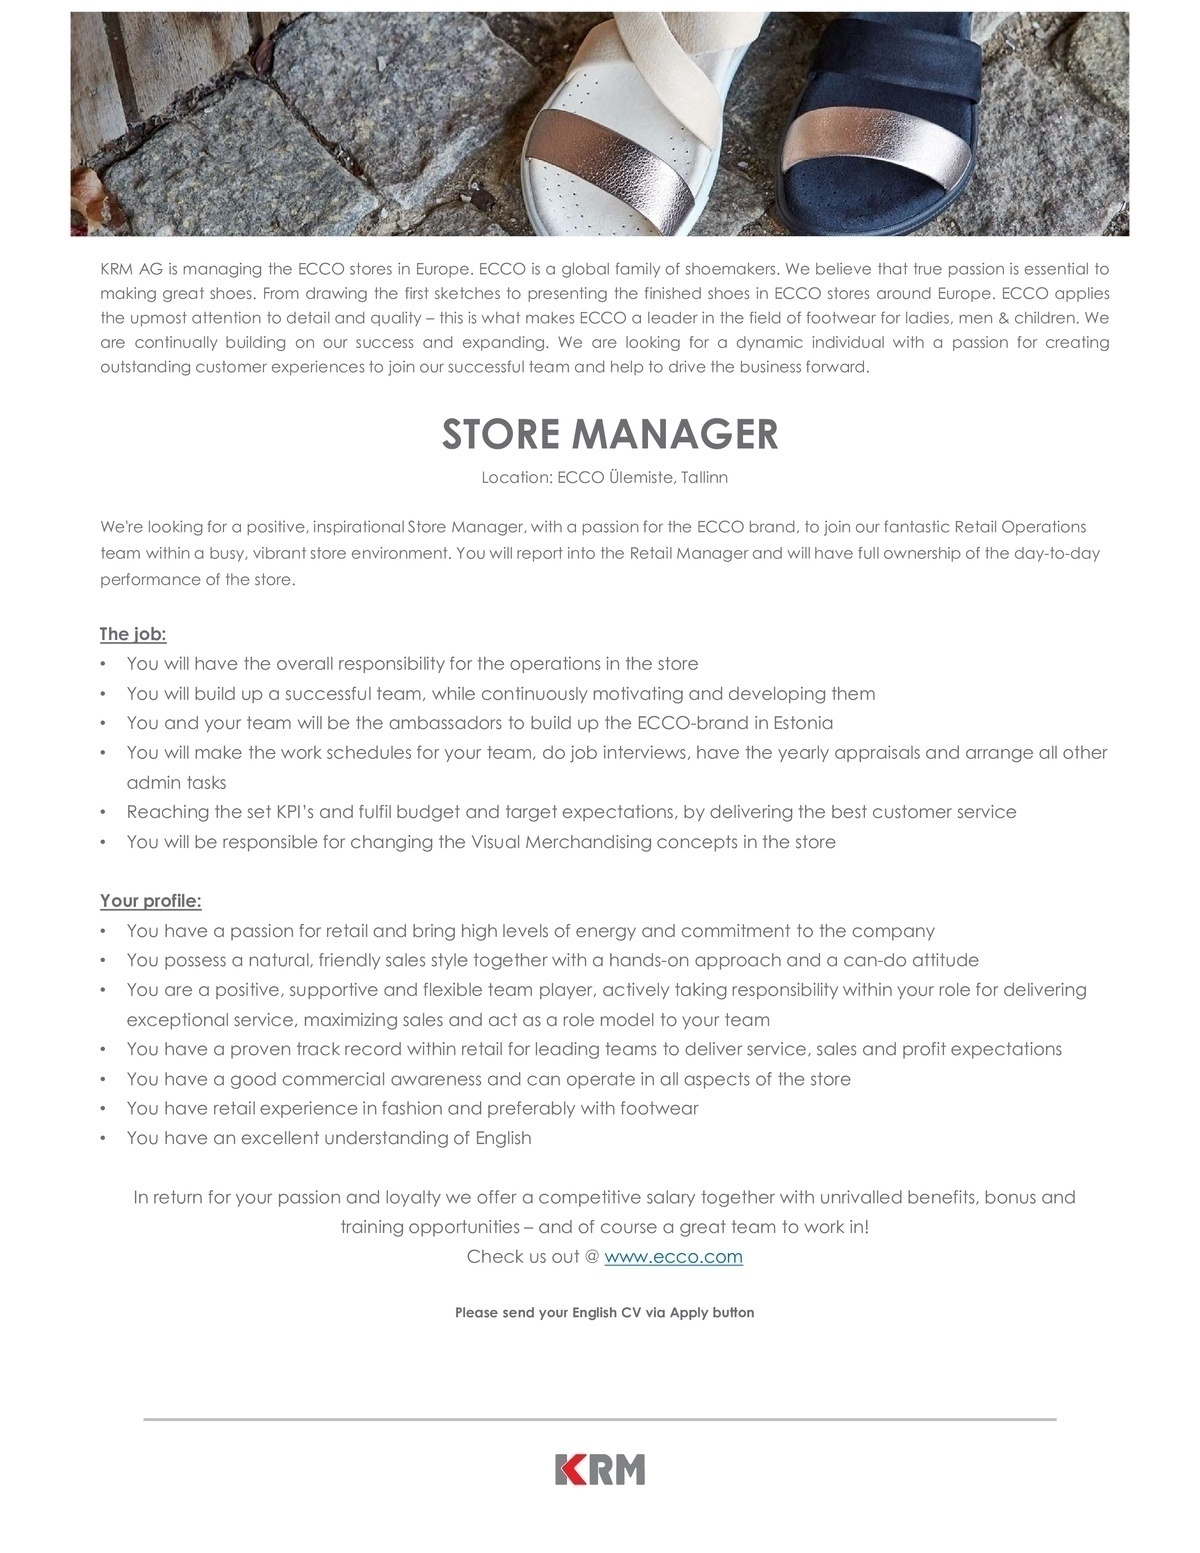 KRM Baltic SIA Ecco store manager